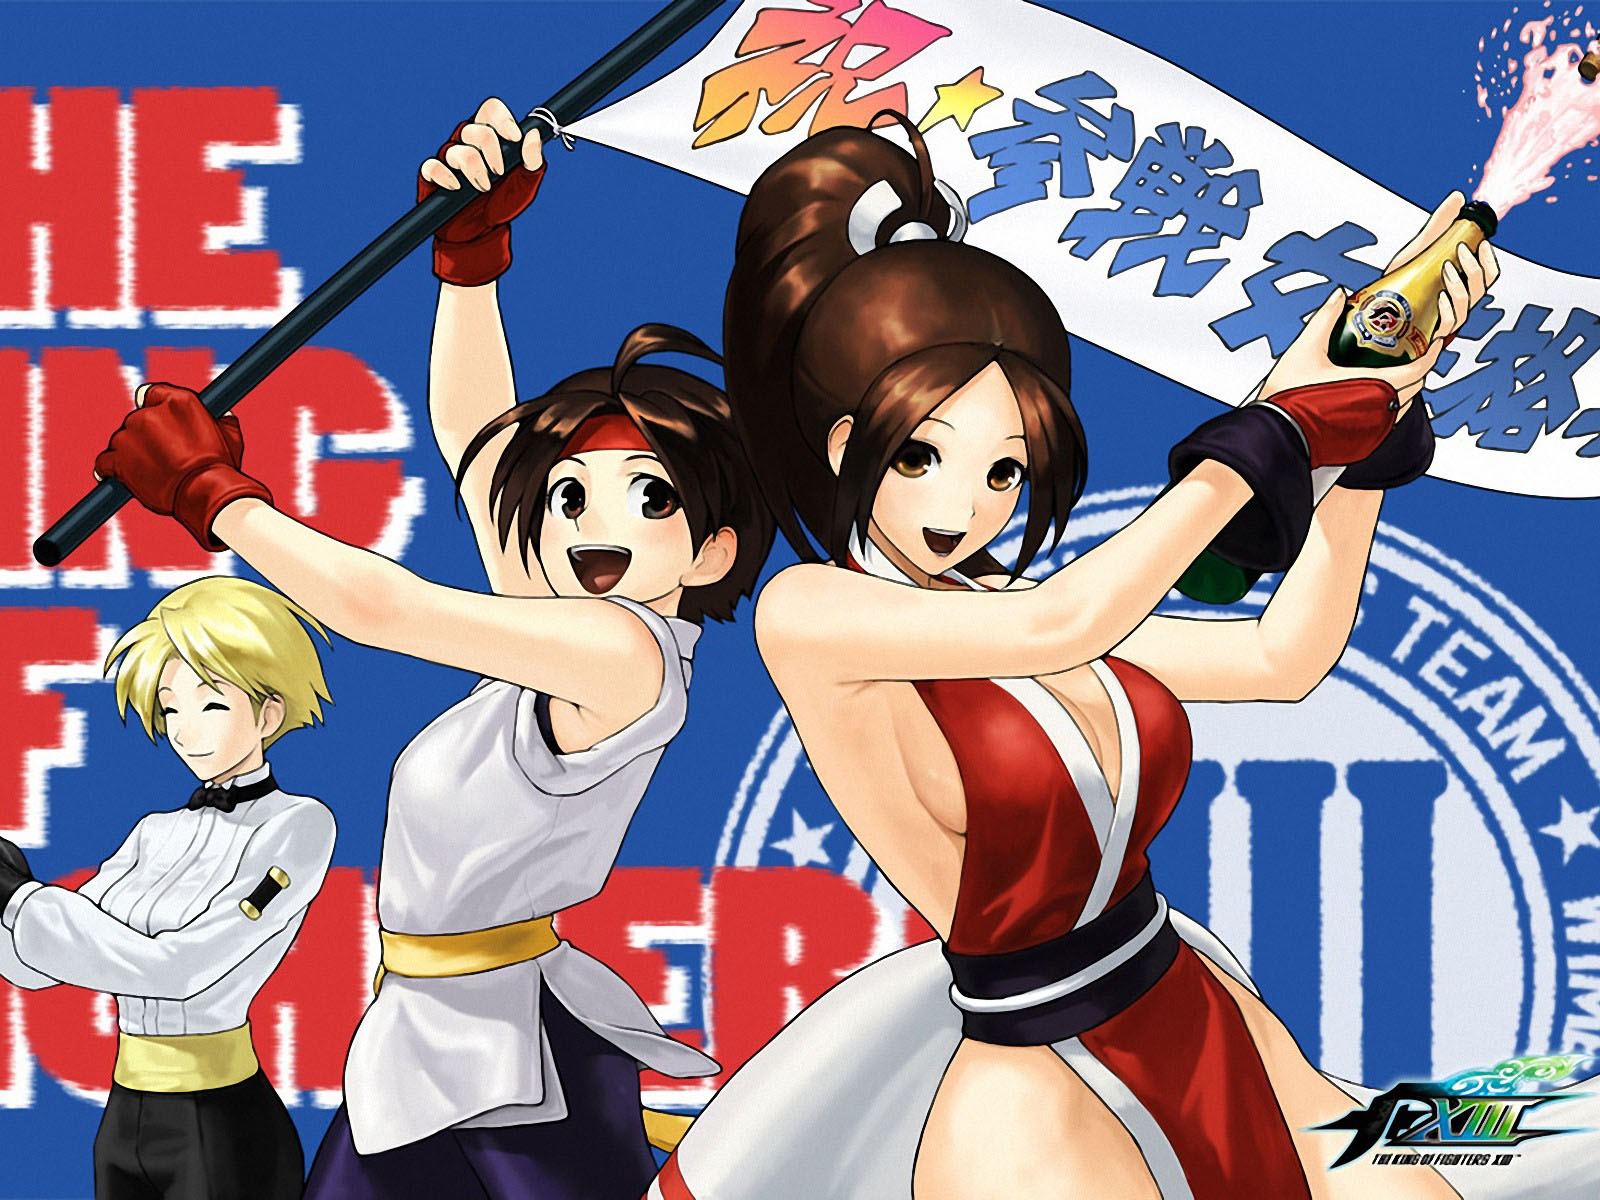 King Of Fighters Wallpaper Fantastic